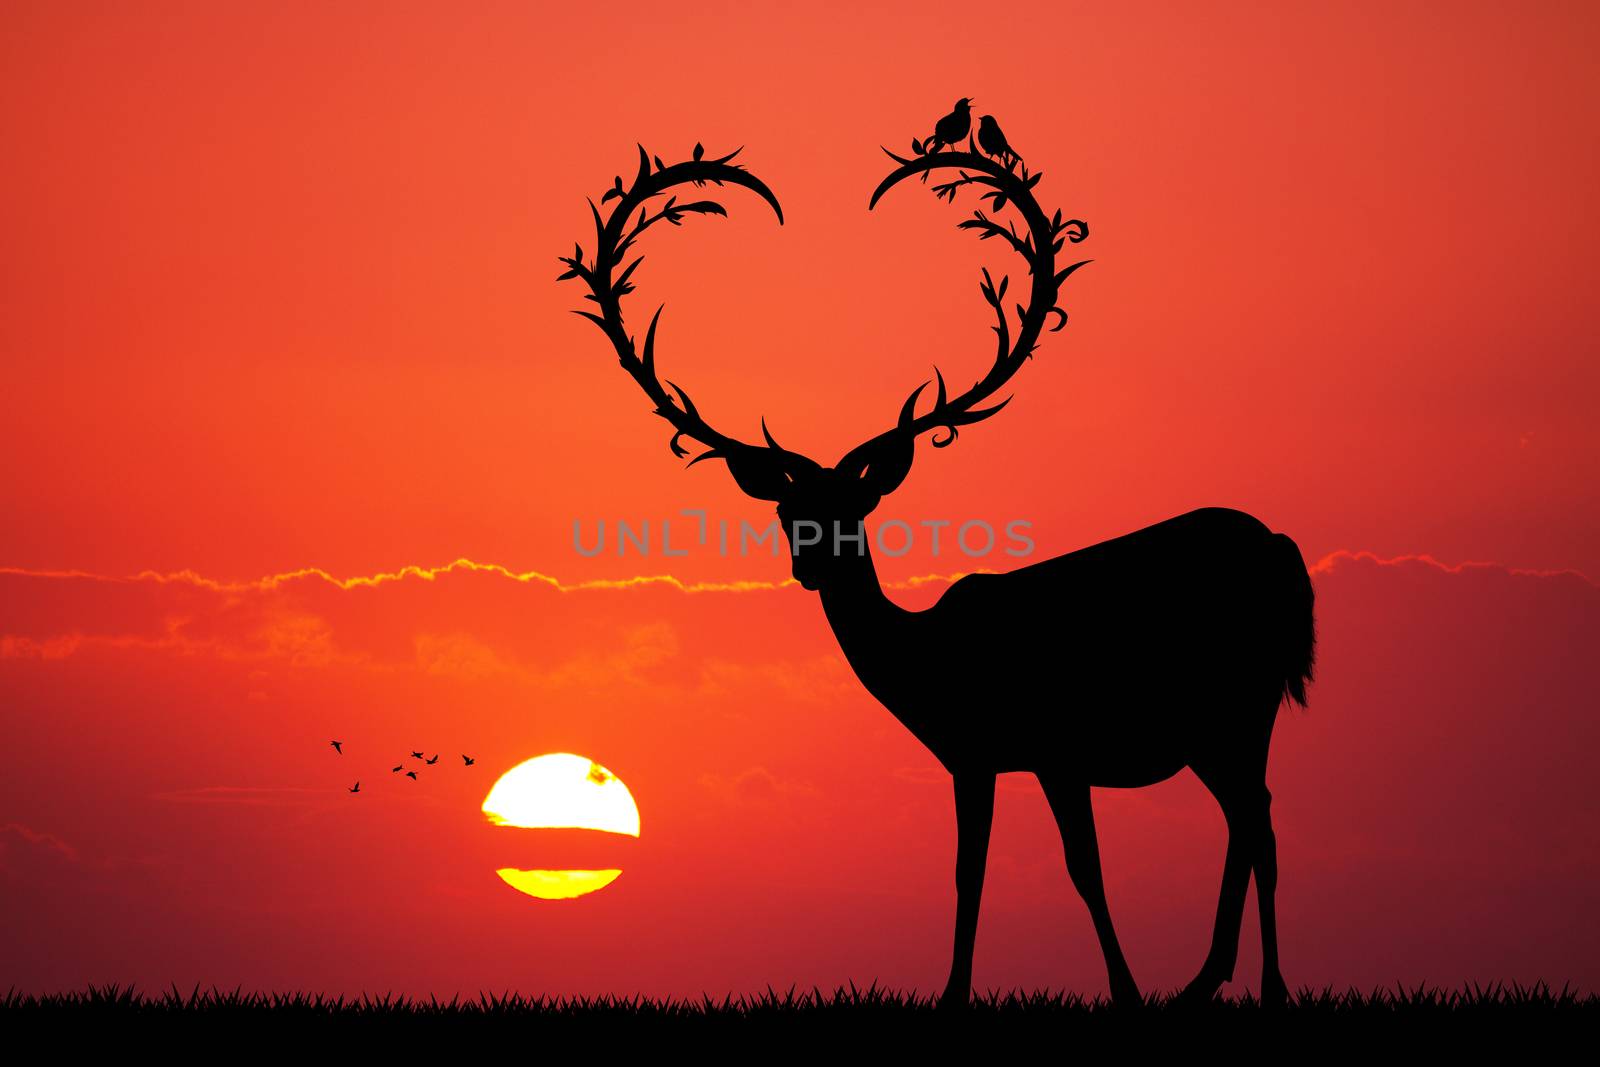 Deer with horns a heart shape at sunset by adrenalina